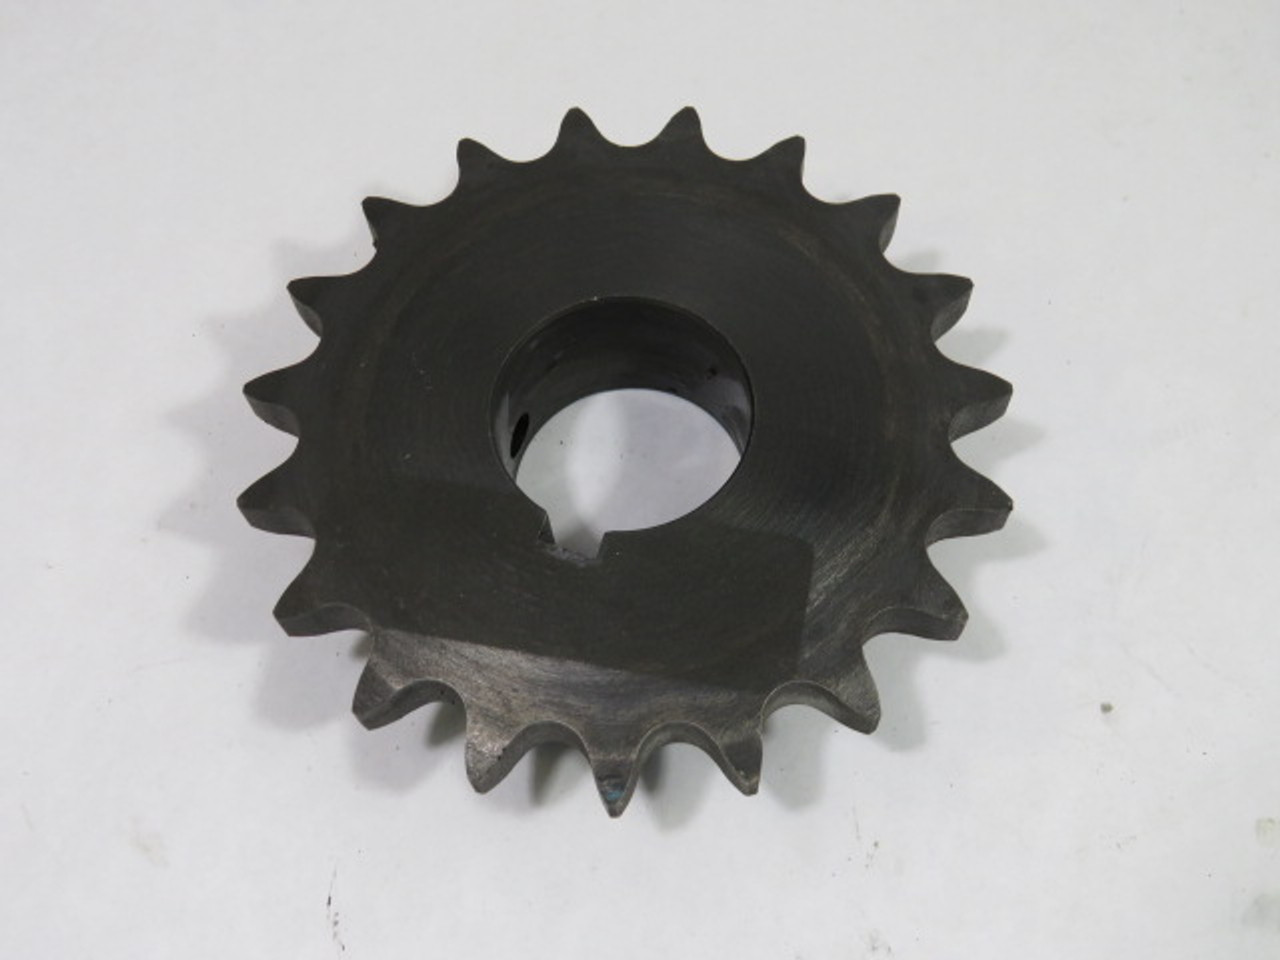 Martin 60BS19HT-1-5/8 Sprocket 1-5/8" Bore 19 Teeth 60 Chain 3/4" Pitch USED